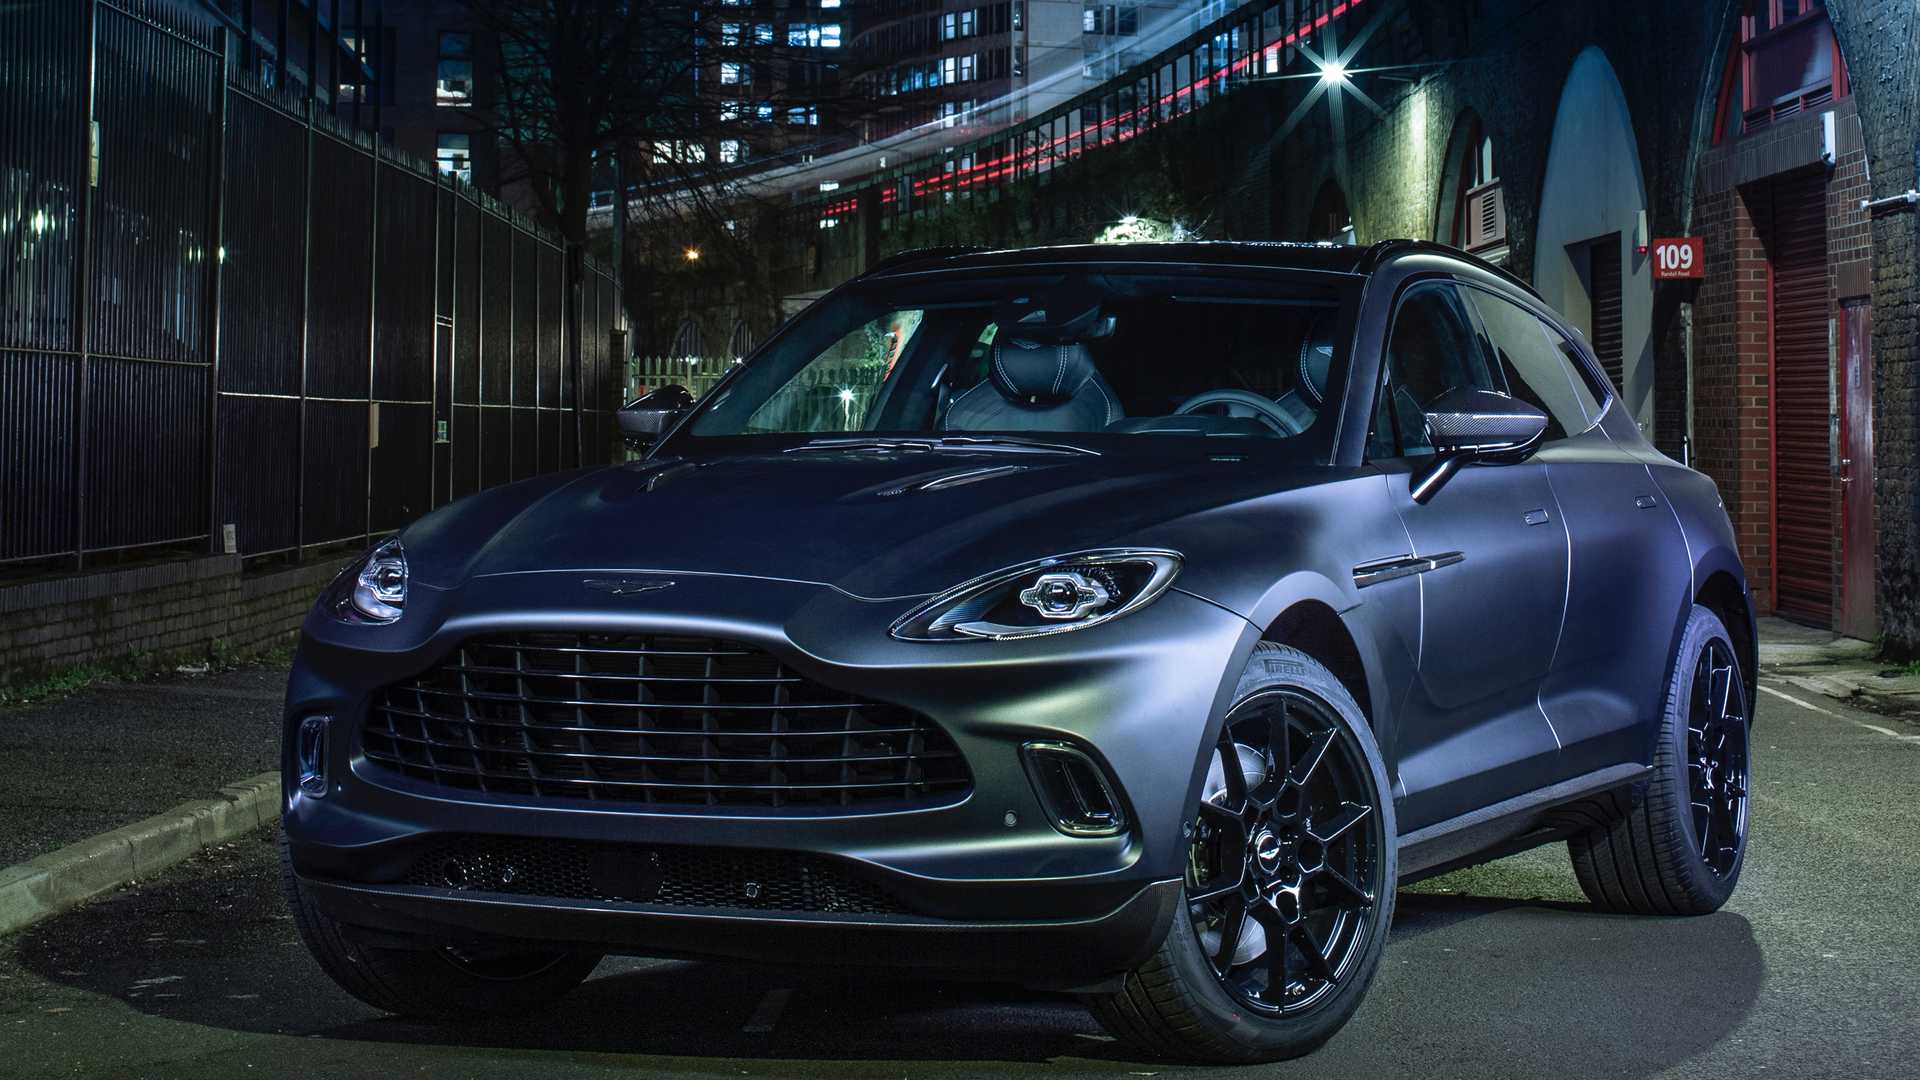 the-aston-martin-dbx-by-q-is-the-bespoke-suv-you-ve-been-waiting-for-2.jpg